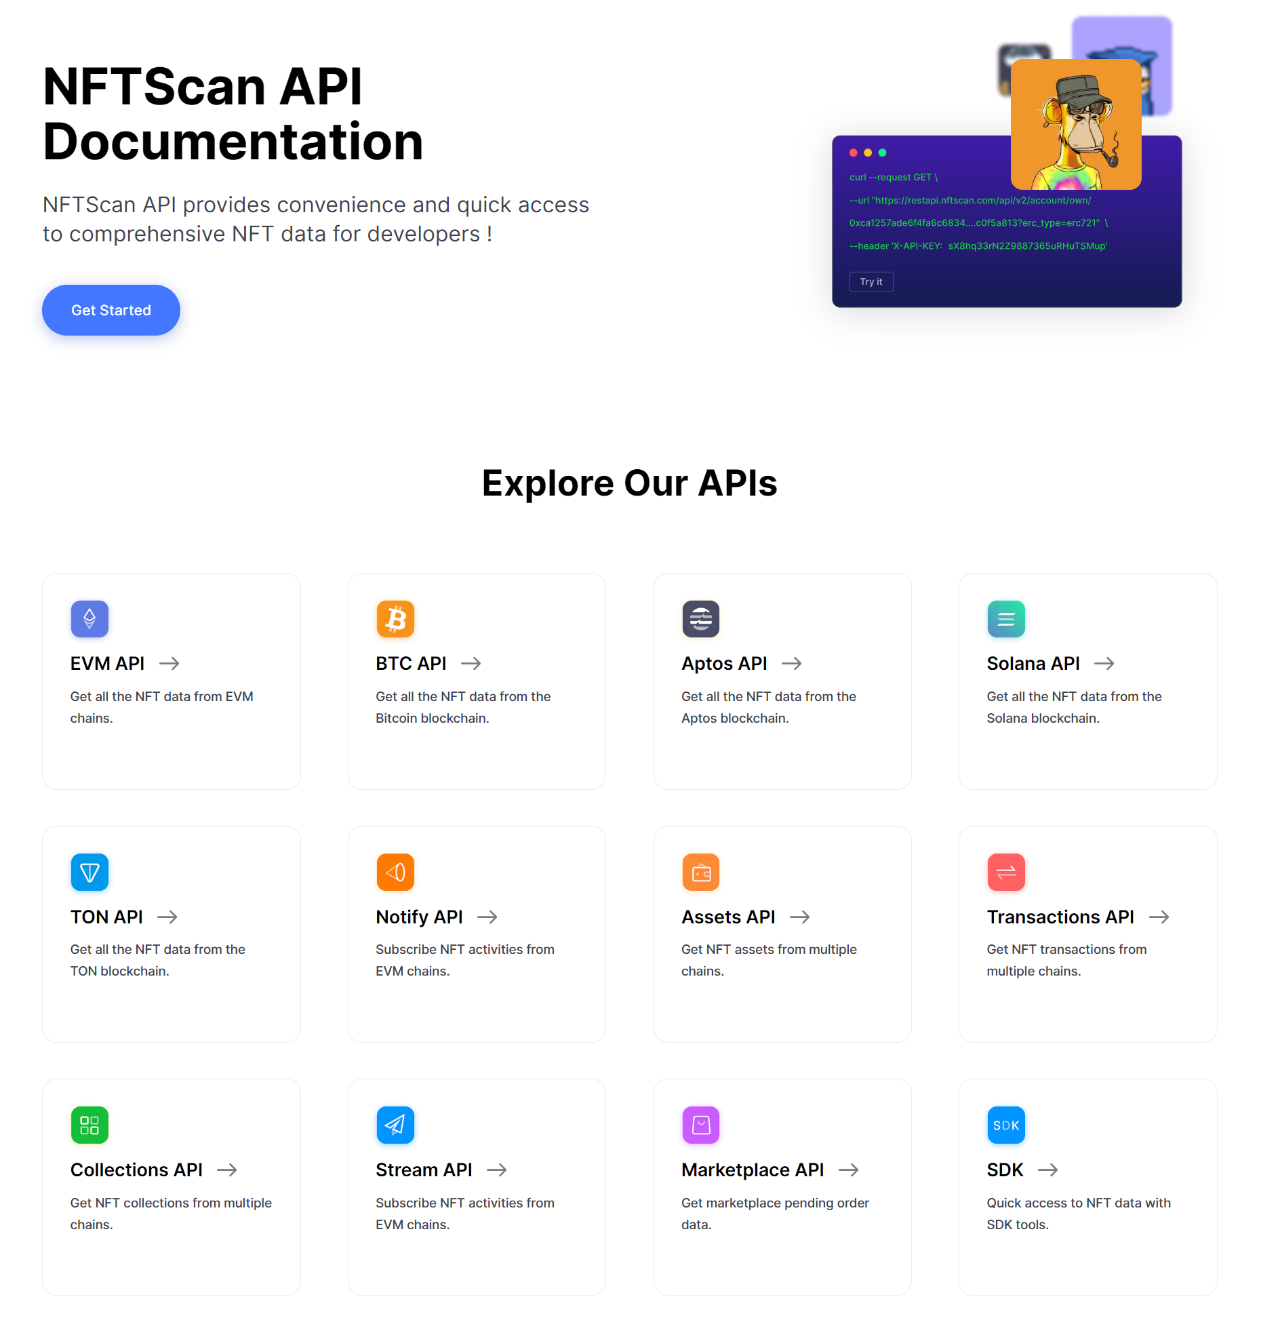 NFTScan on X: 📣 Get Ready! NFTScan's Partner Talk #4 with TON